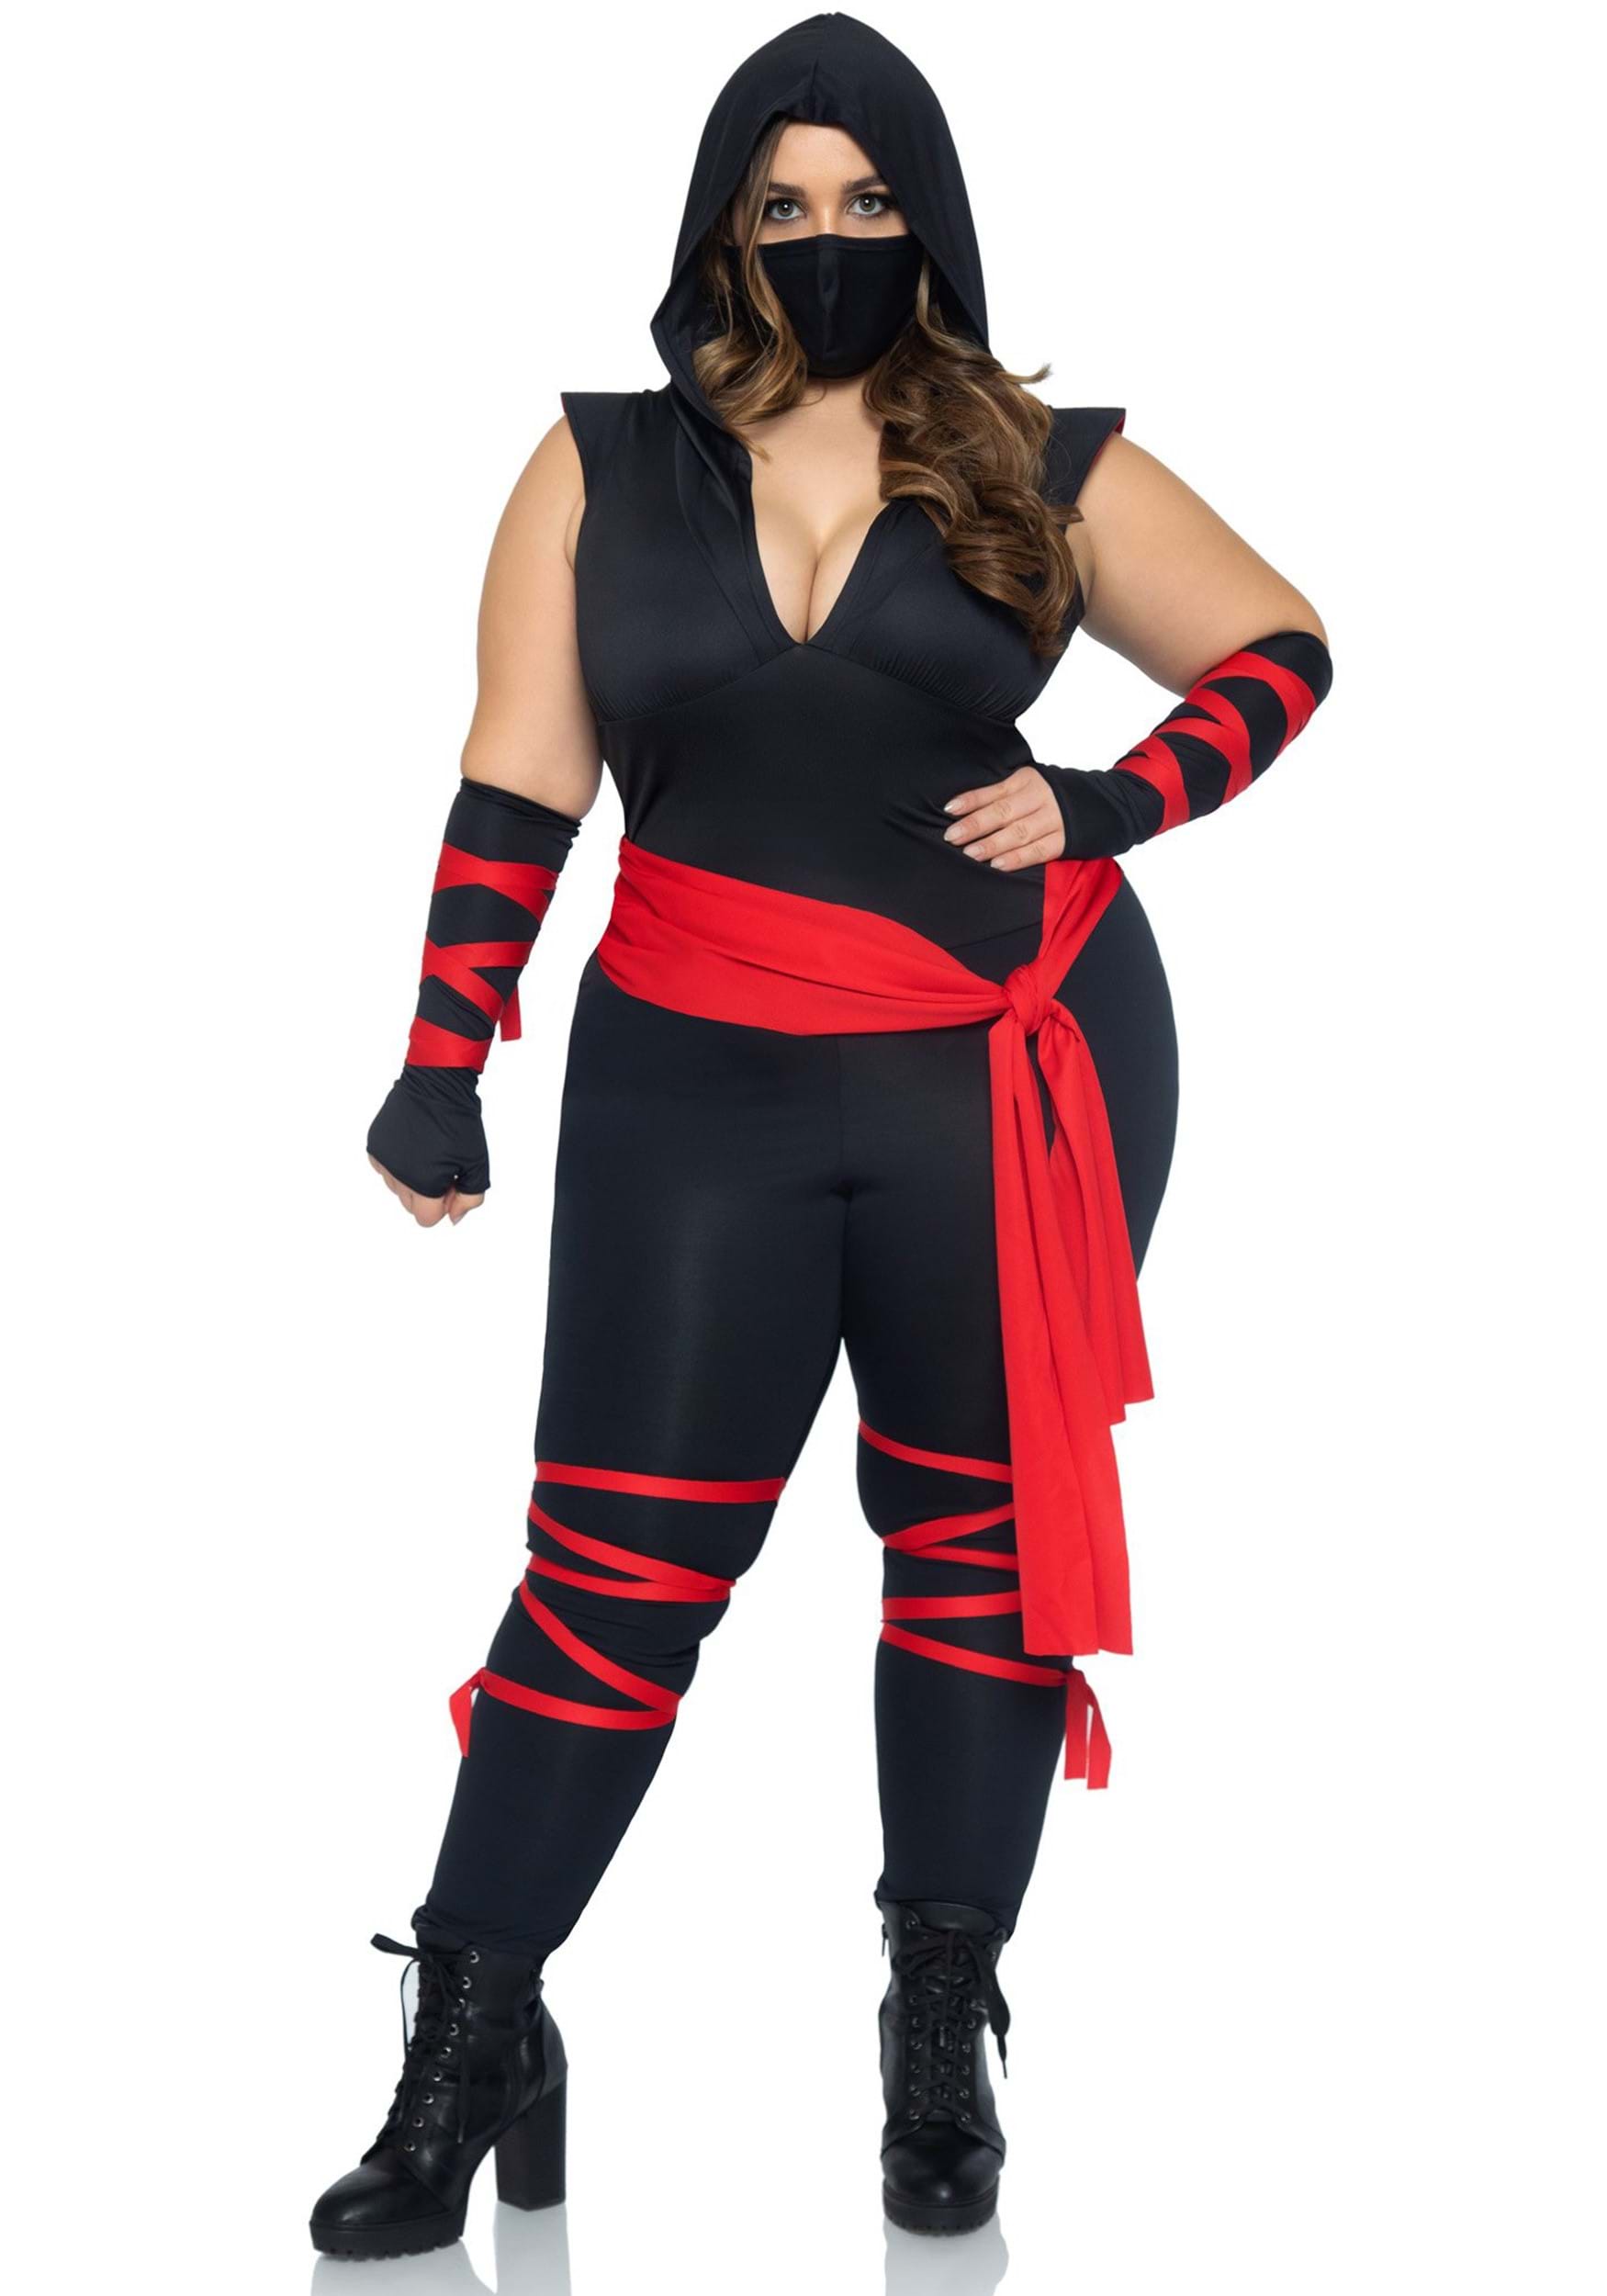 Plus Size Sexy Deadly Ninja Costume for Women